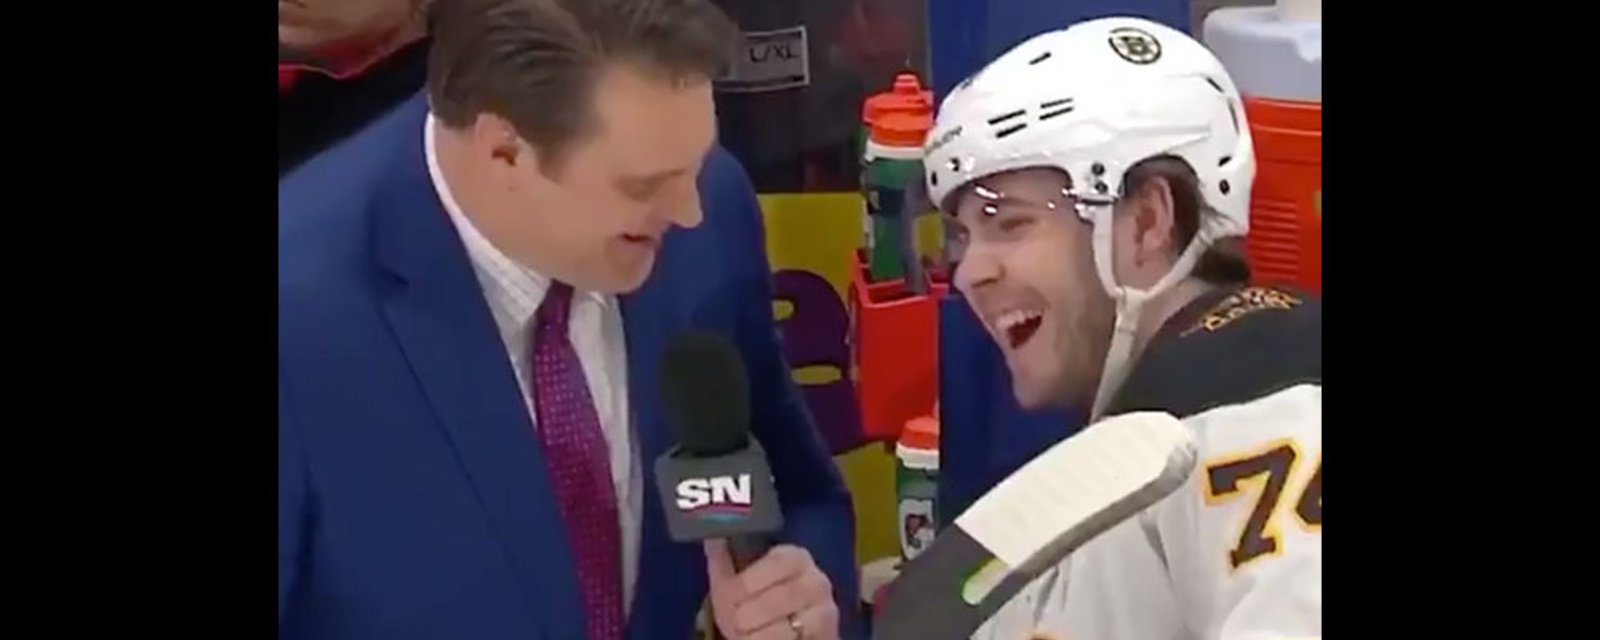 Wholesome Moment: DeBrusk gets interviewed by his Dad during Sportsnet broadcast